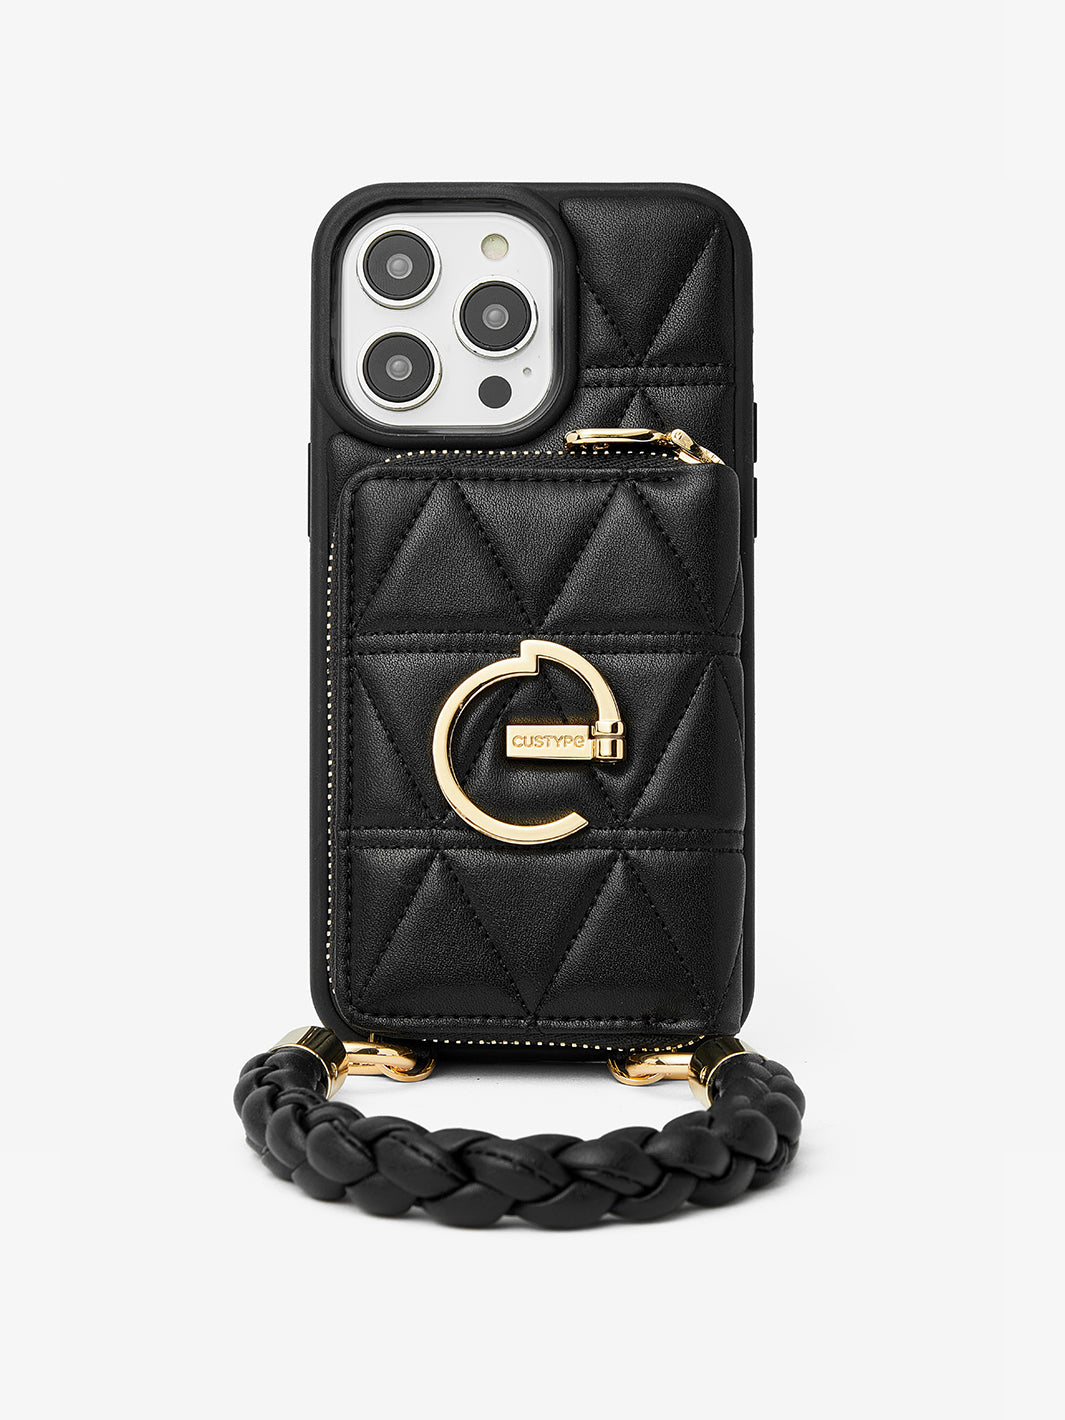 Custype wallet phone case with wrist strap with kickstand